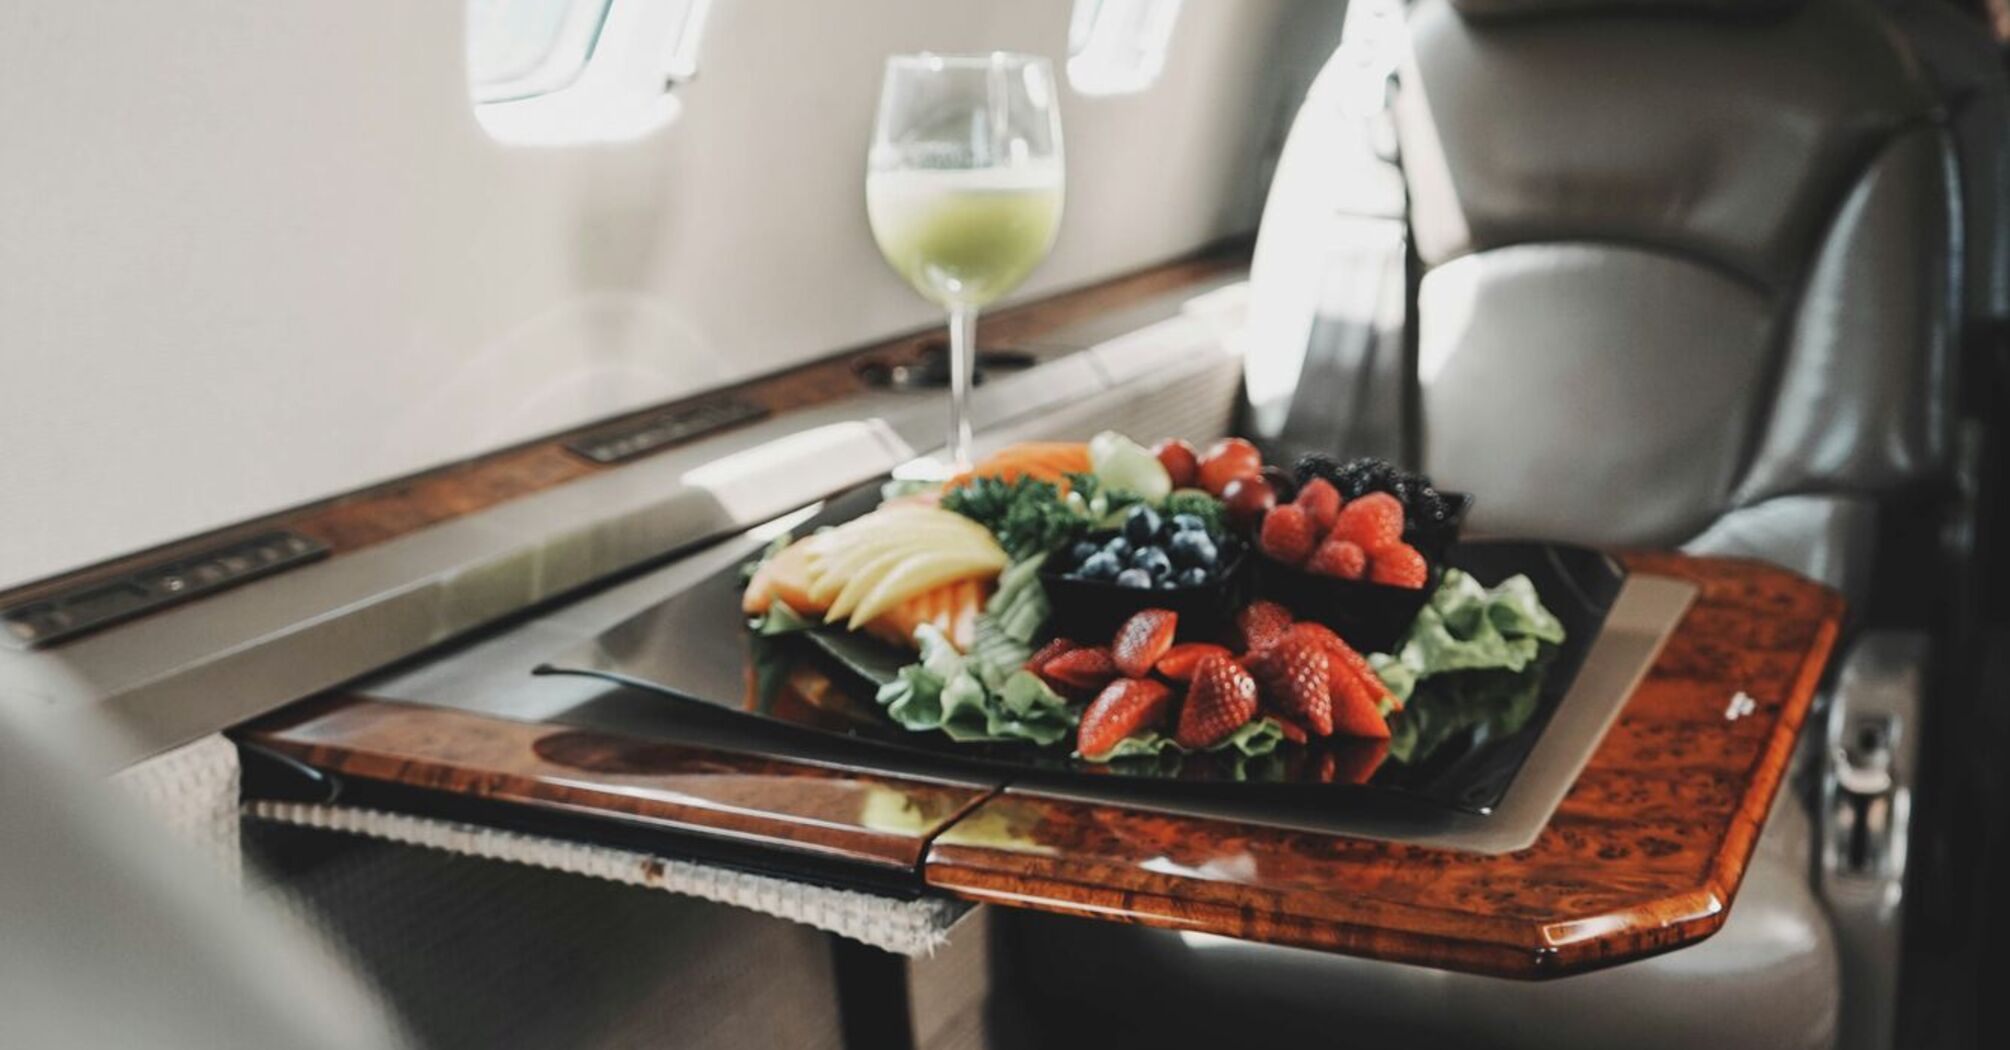 A flight attendant gave advice on what food to avoid on an airplane and named an alternative